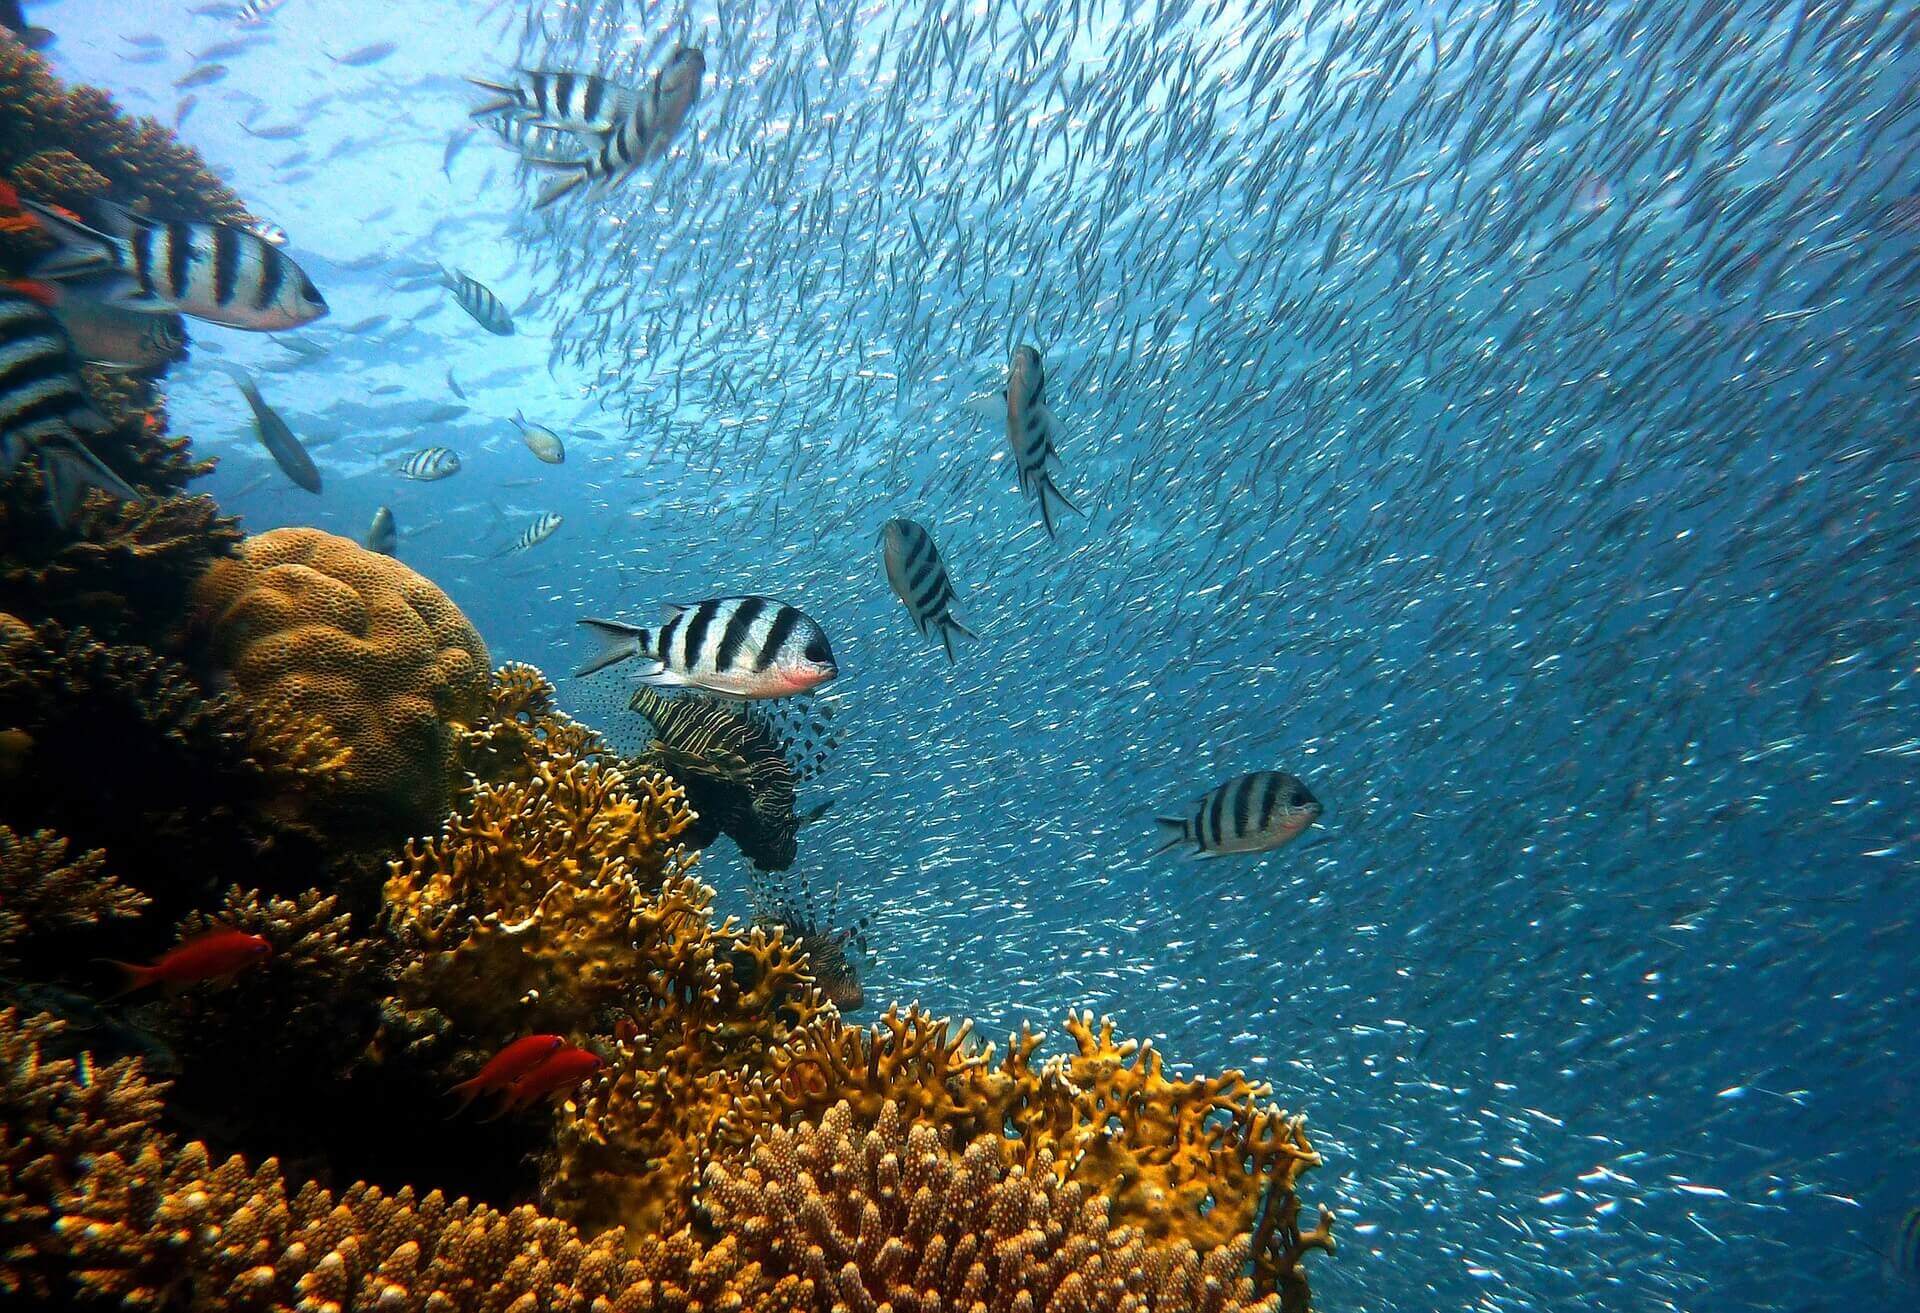 Image from Pixabay of a school of fish